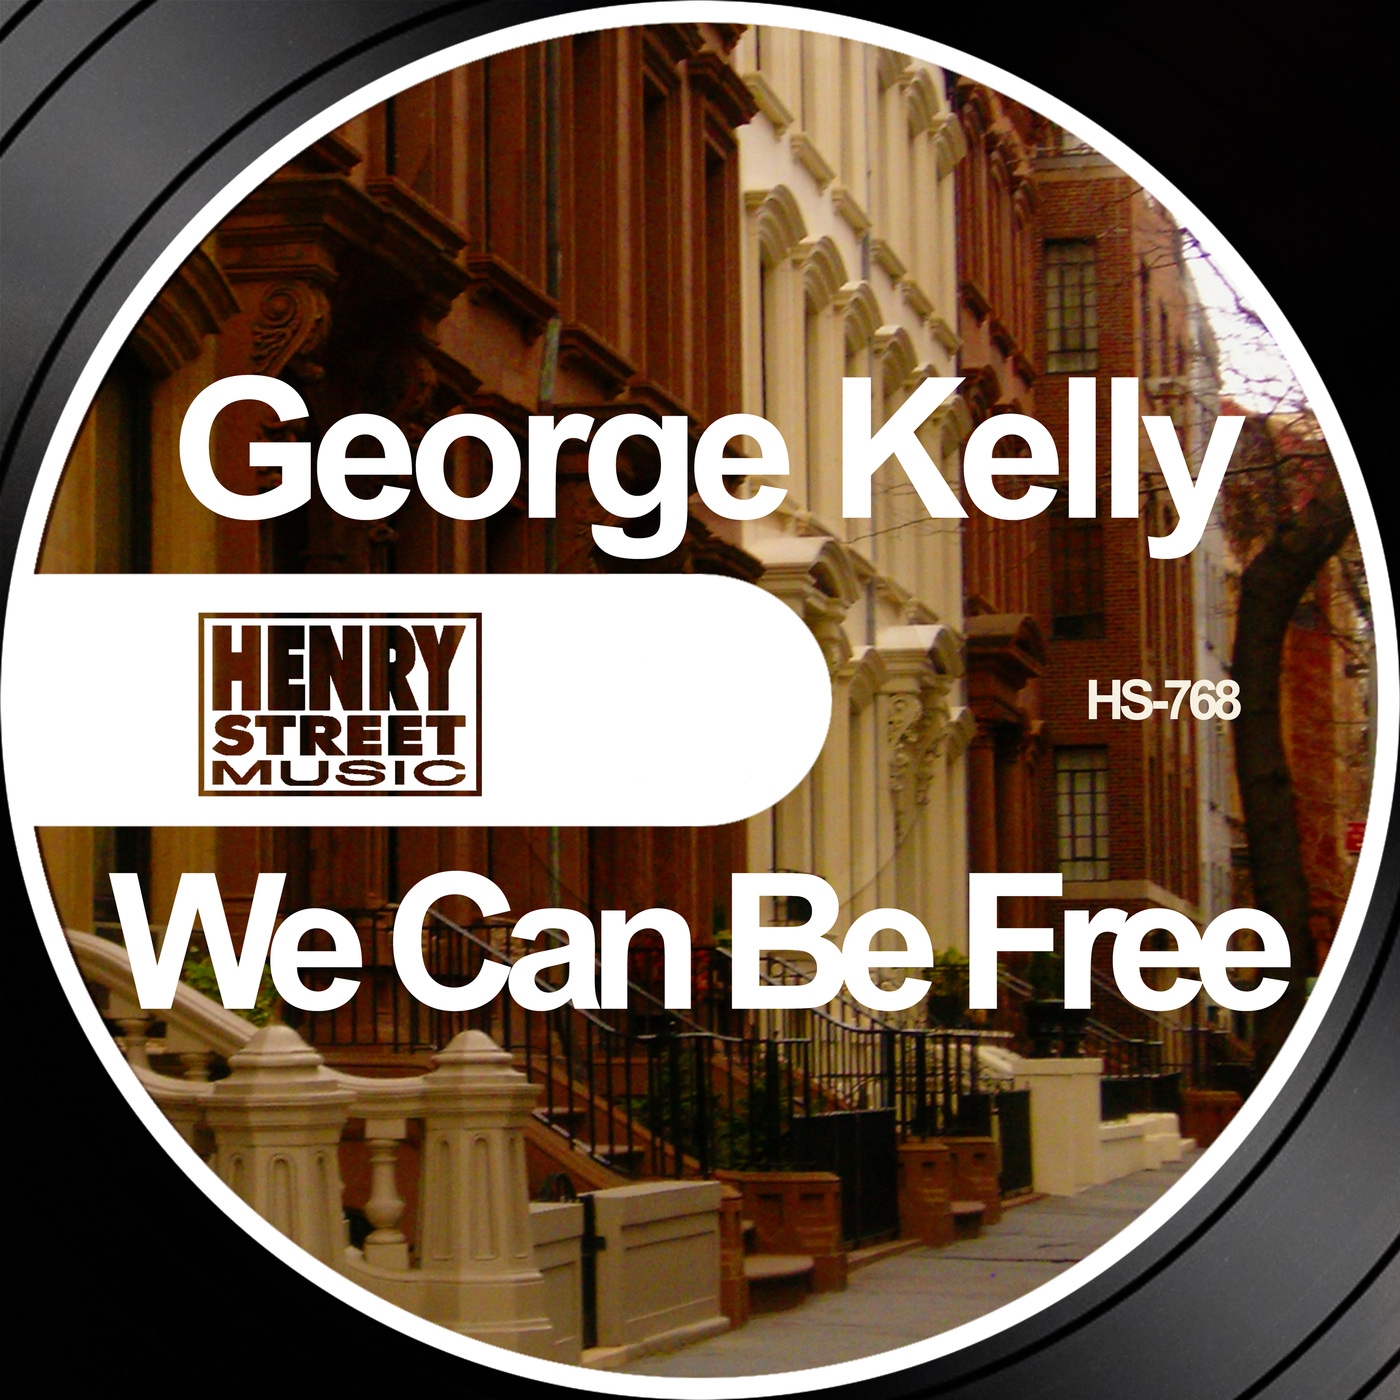 George Kelly - We Can Be Free / Henry Street Music